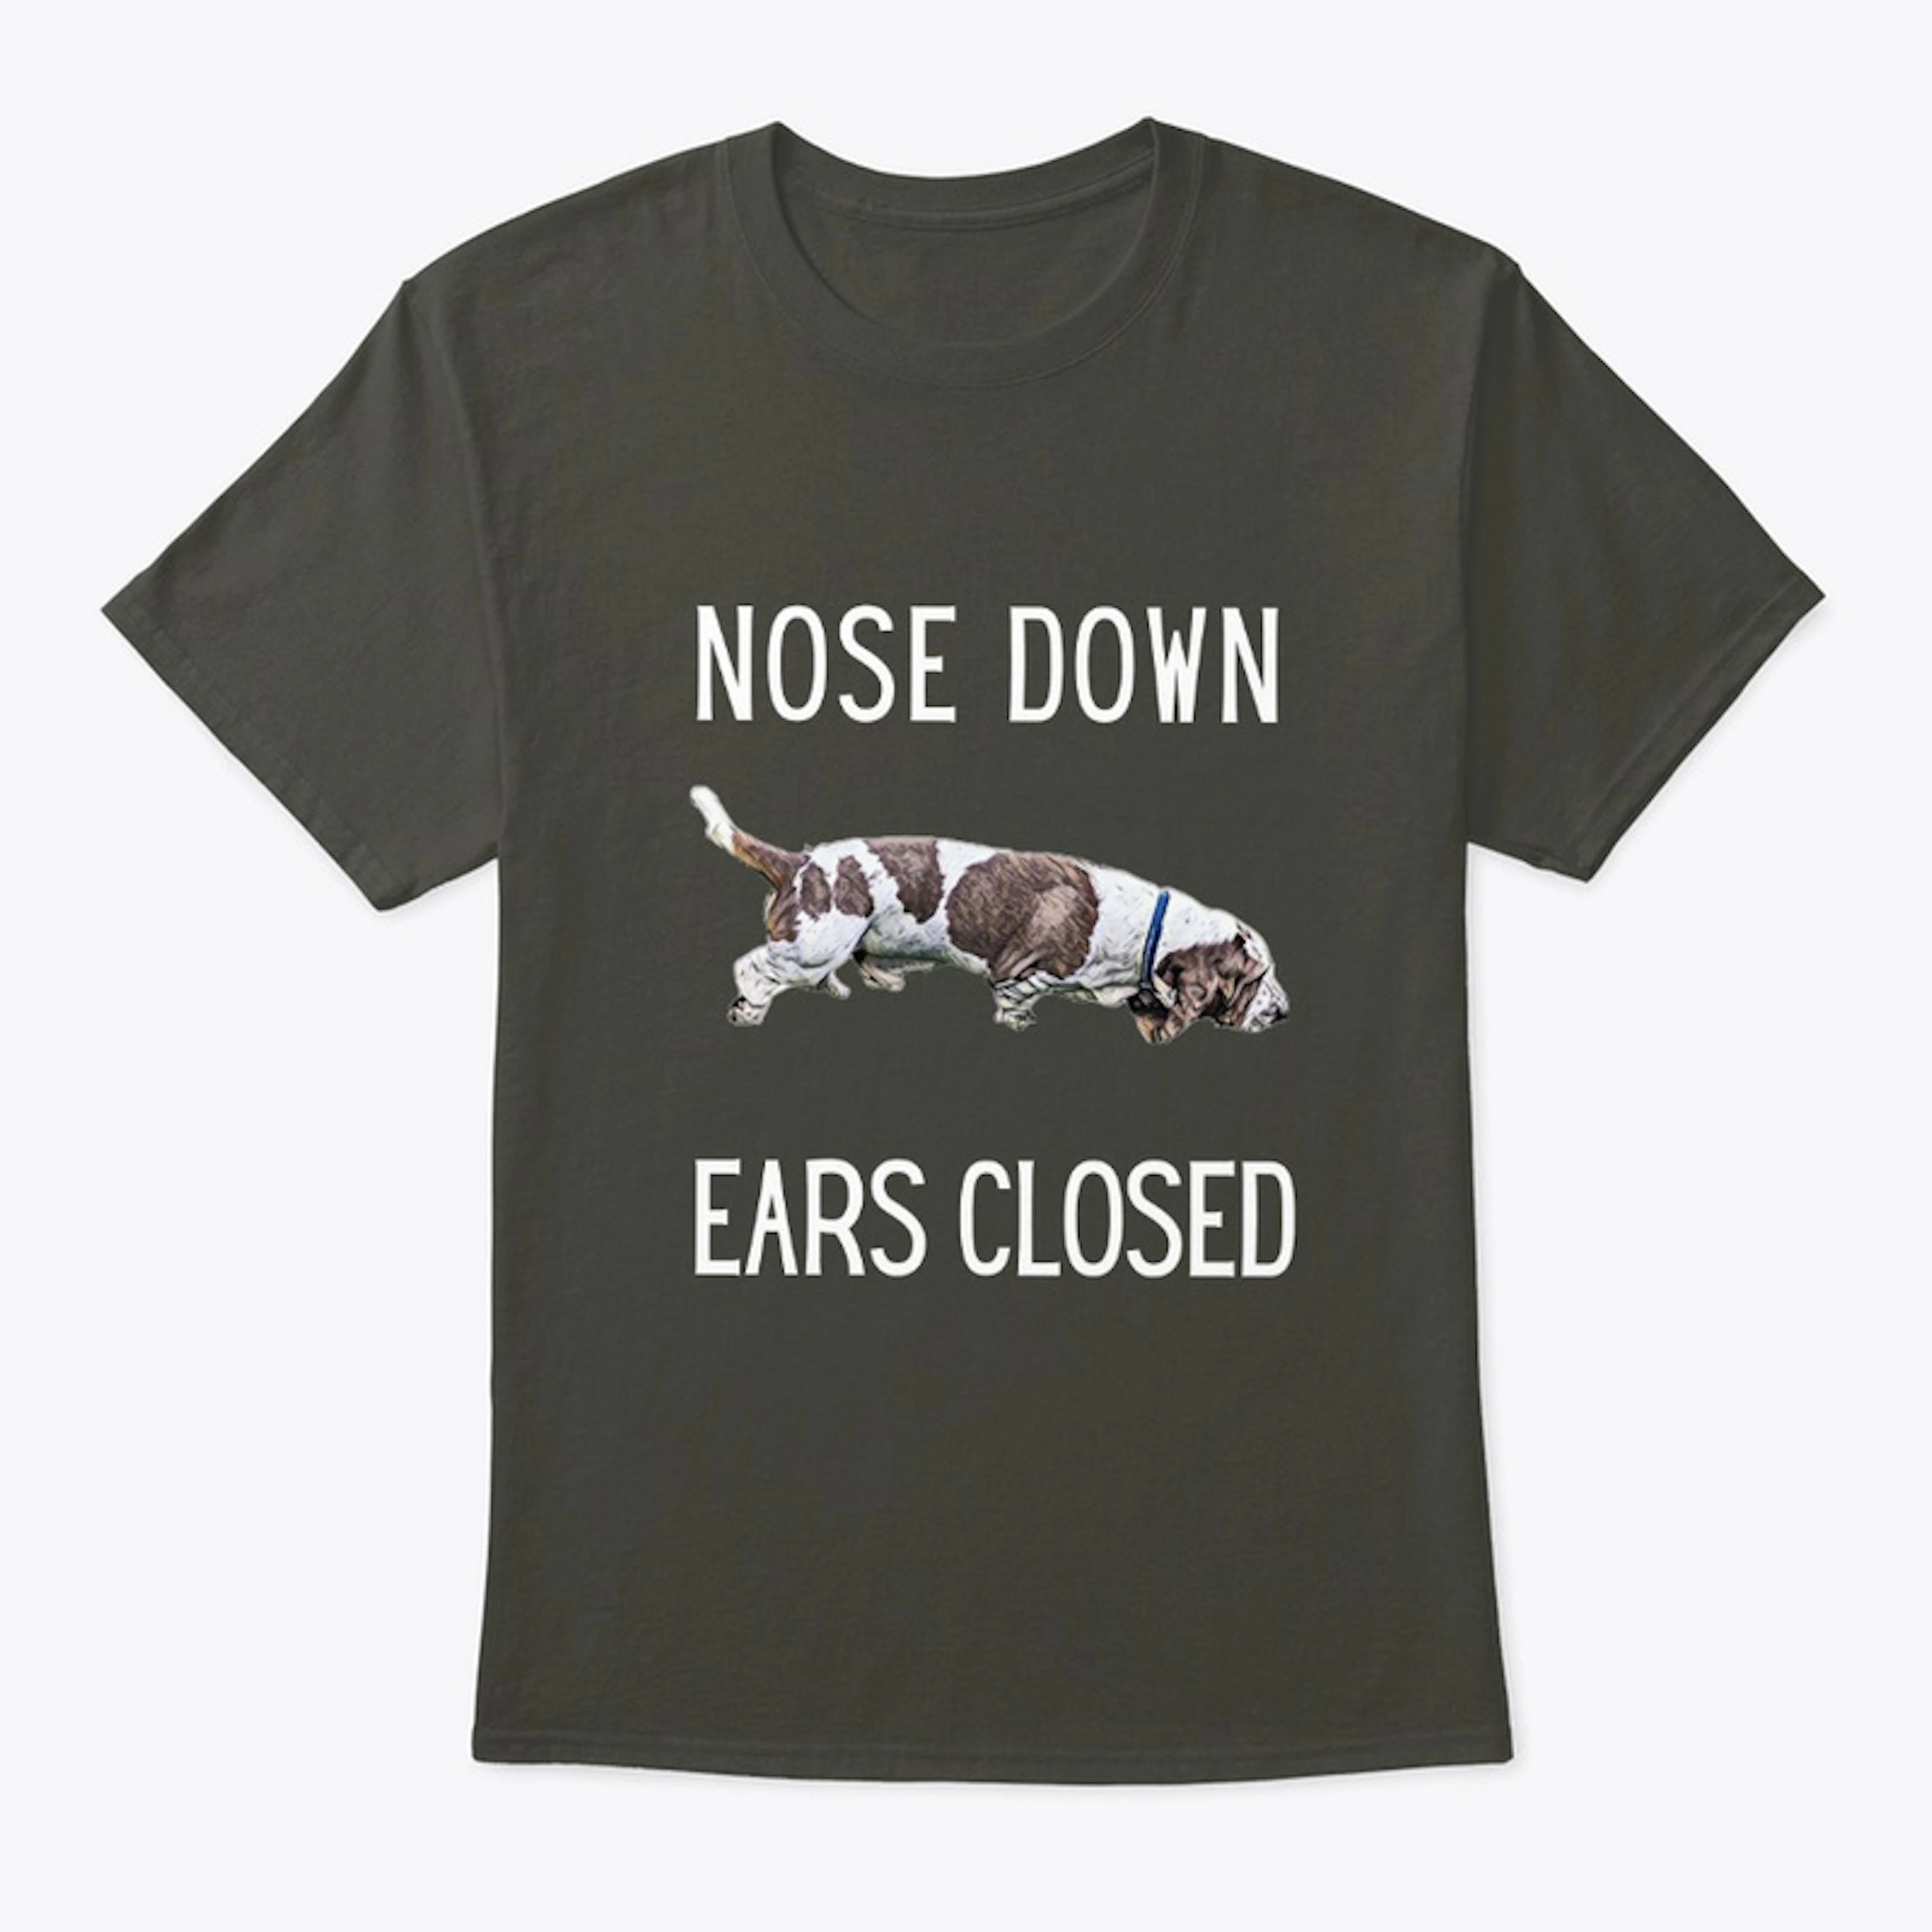 Nose down Ears closed